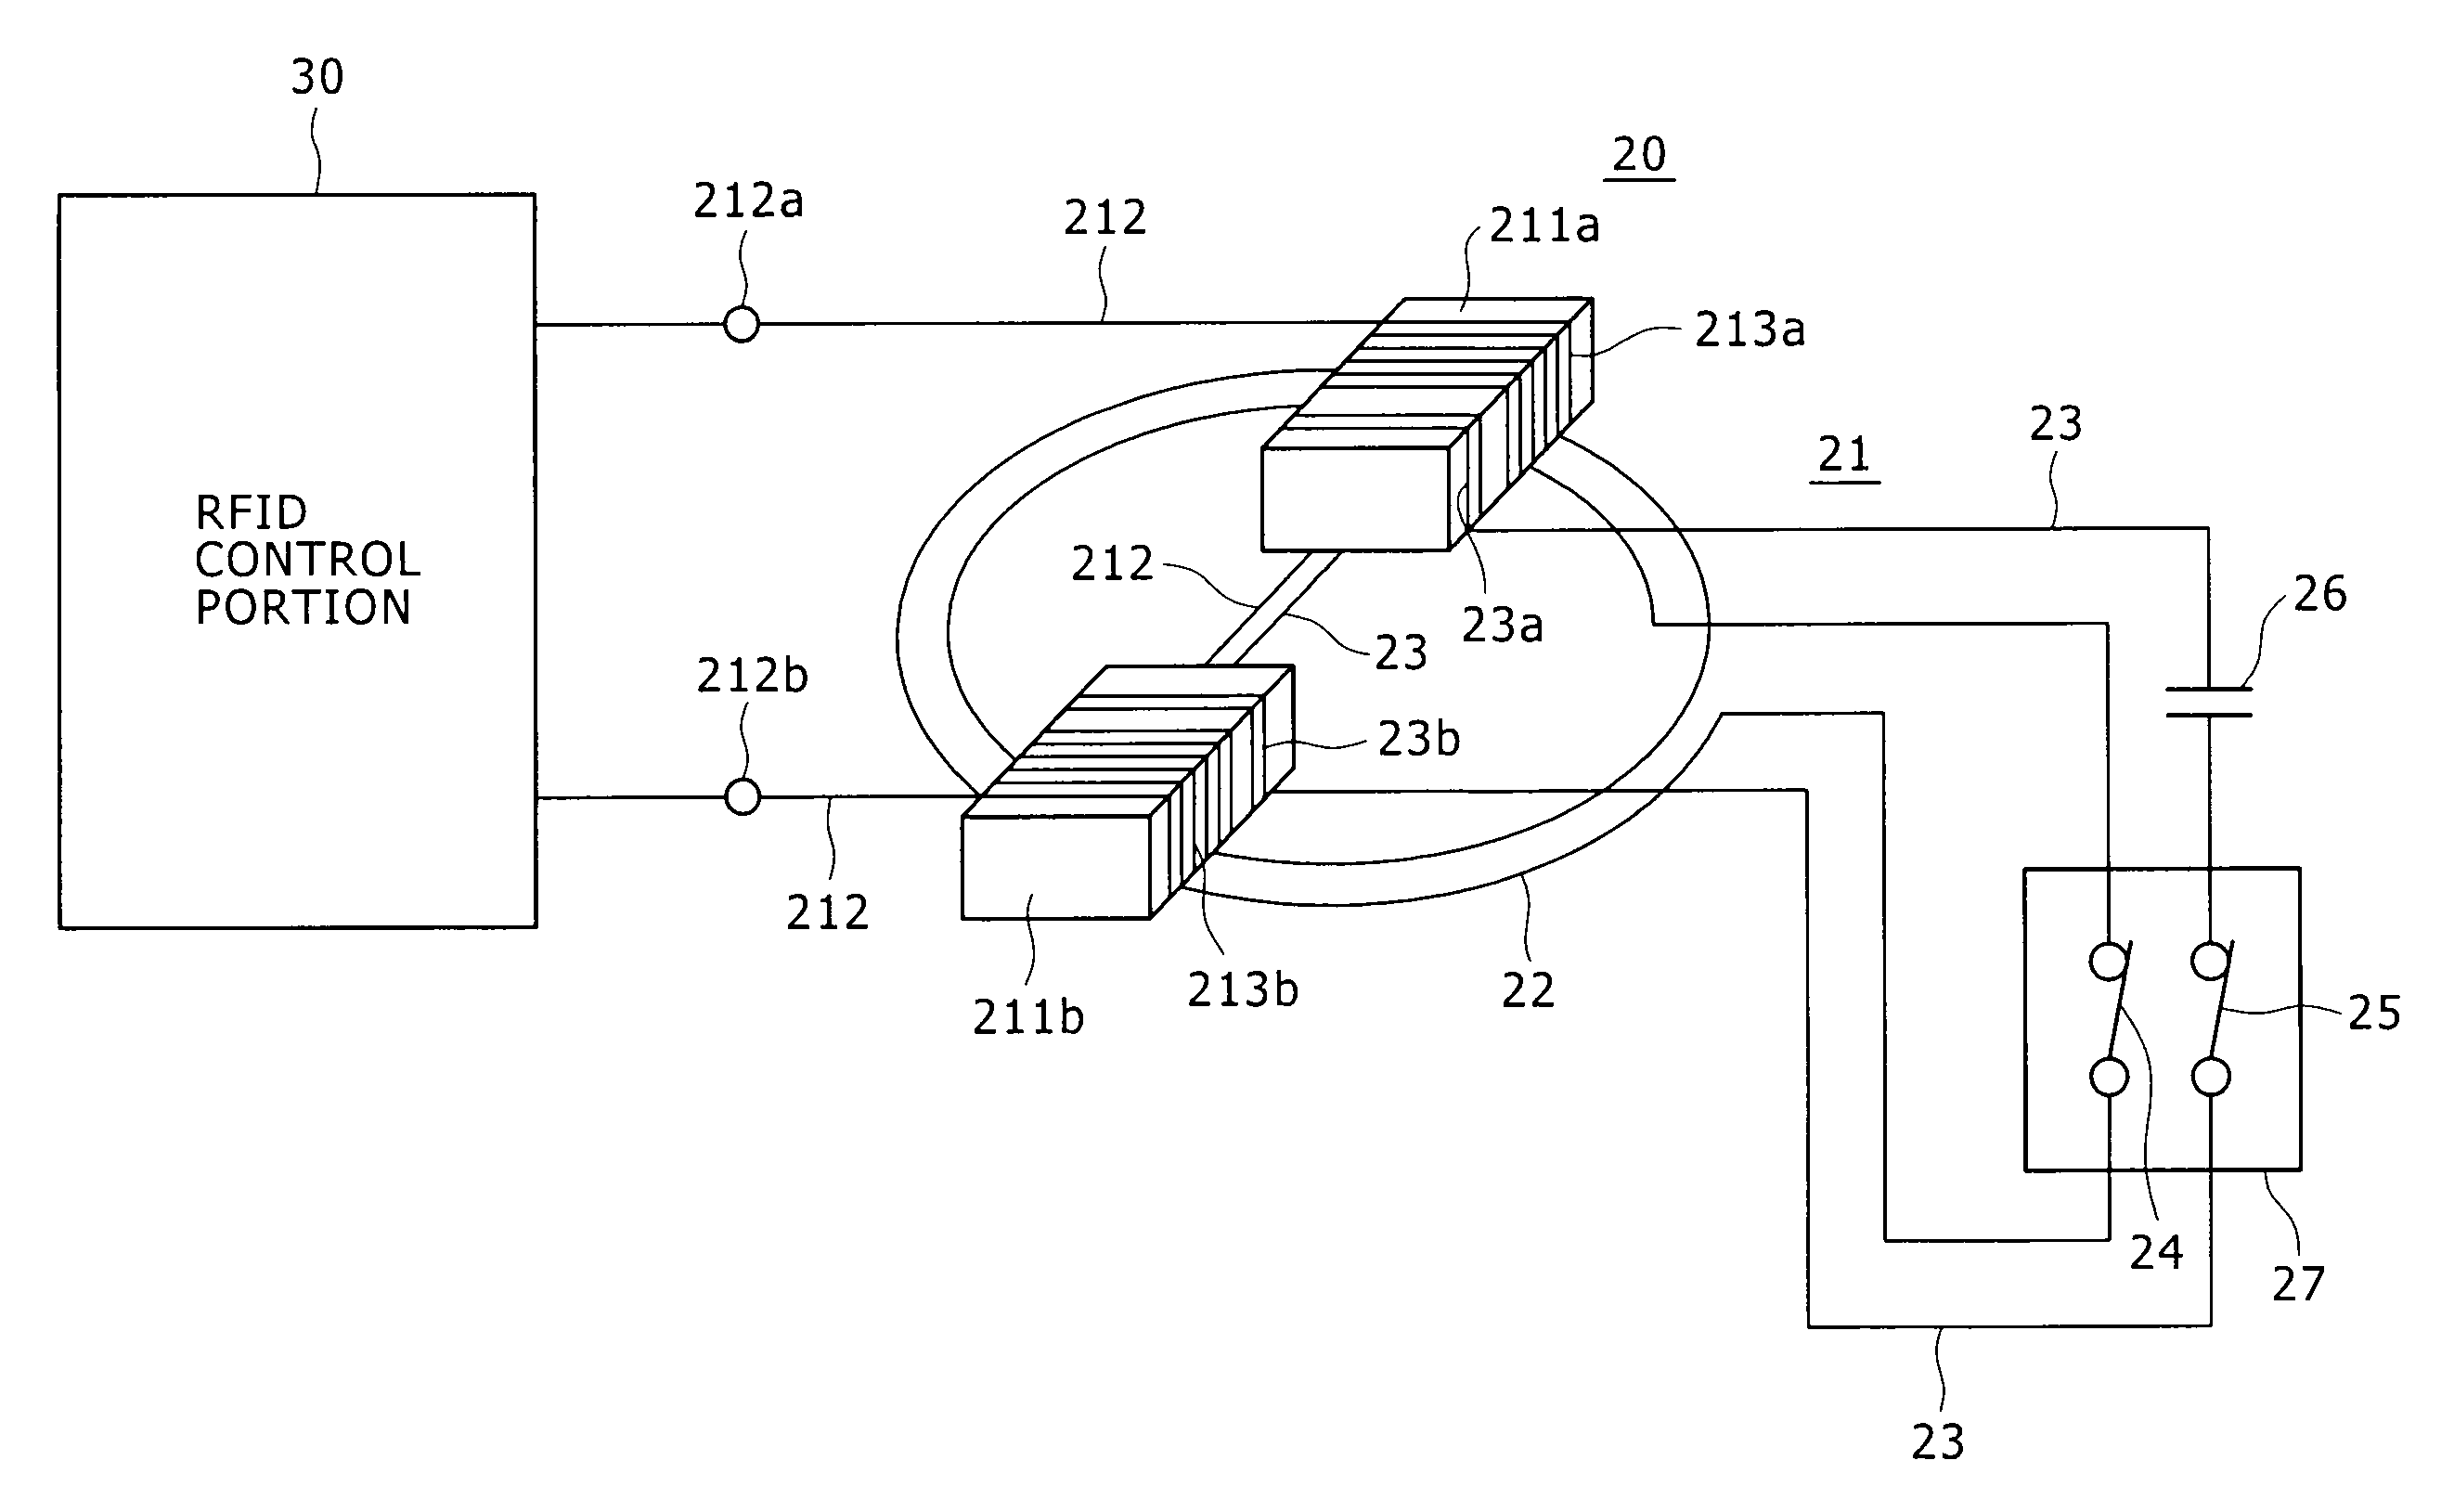 Near field communication antenna and mobile device